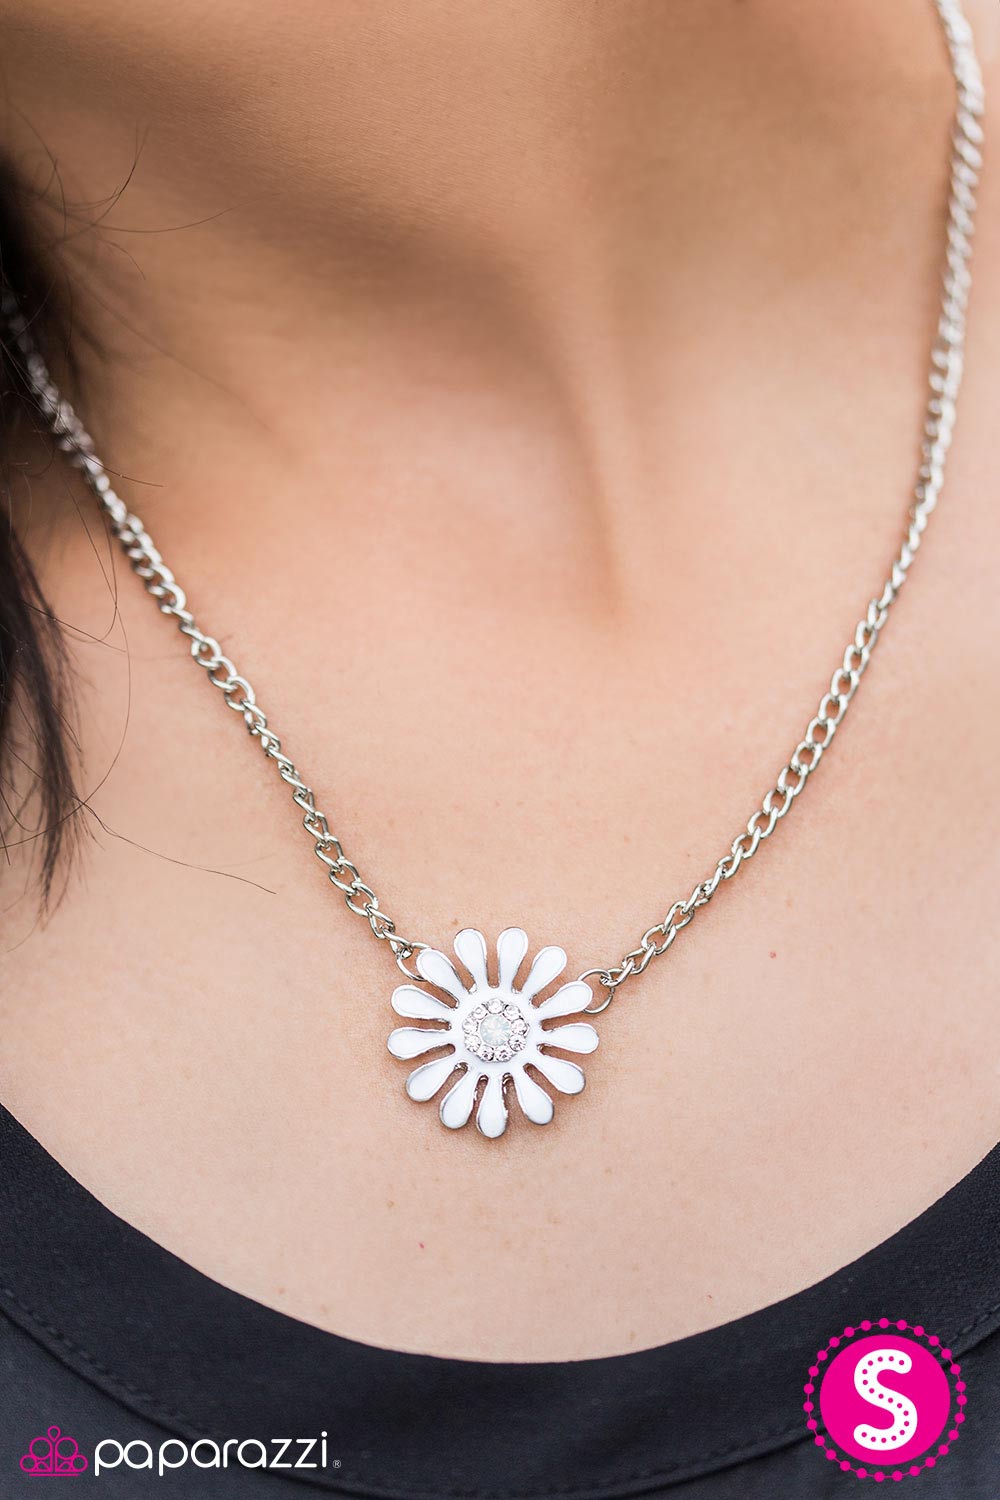 Bloom With Grace - White - Paparazzi necklace